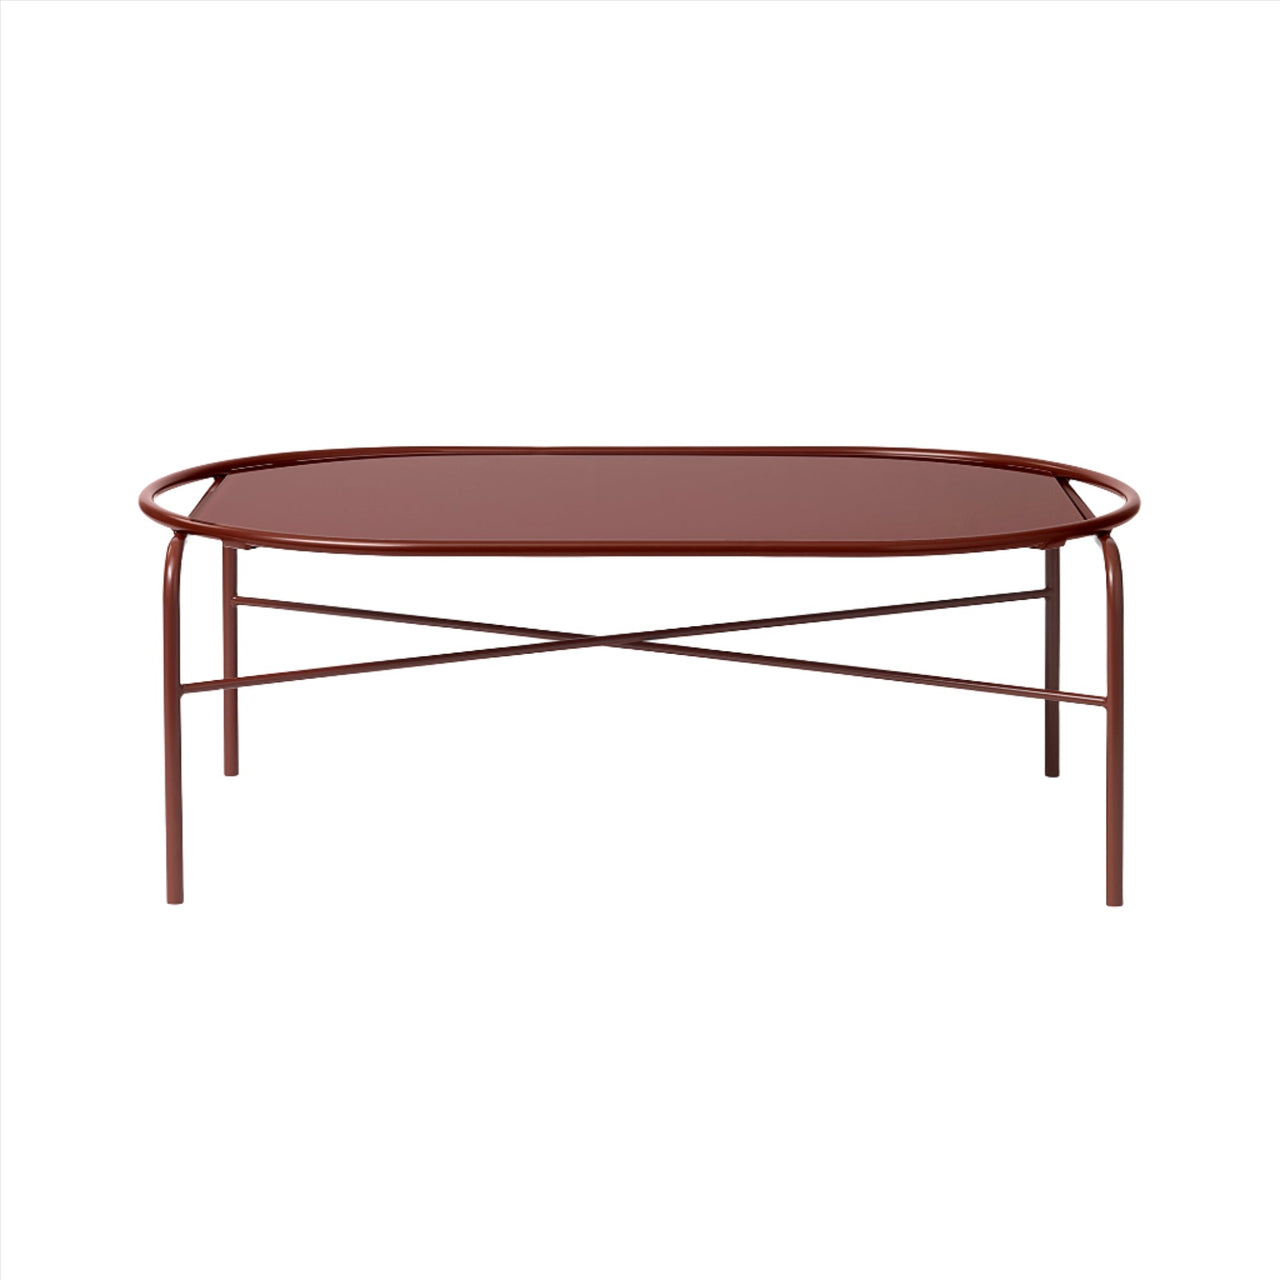 Secant Coffee Table: Oval + Oxide Red + Redish Glass